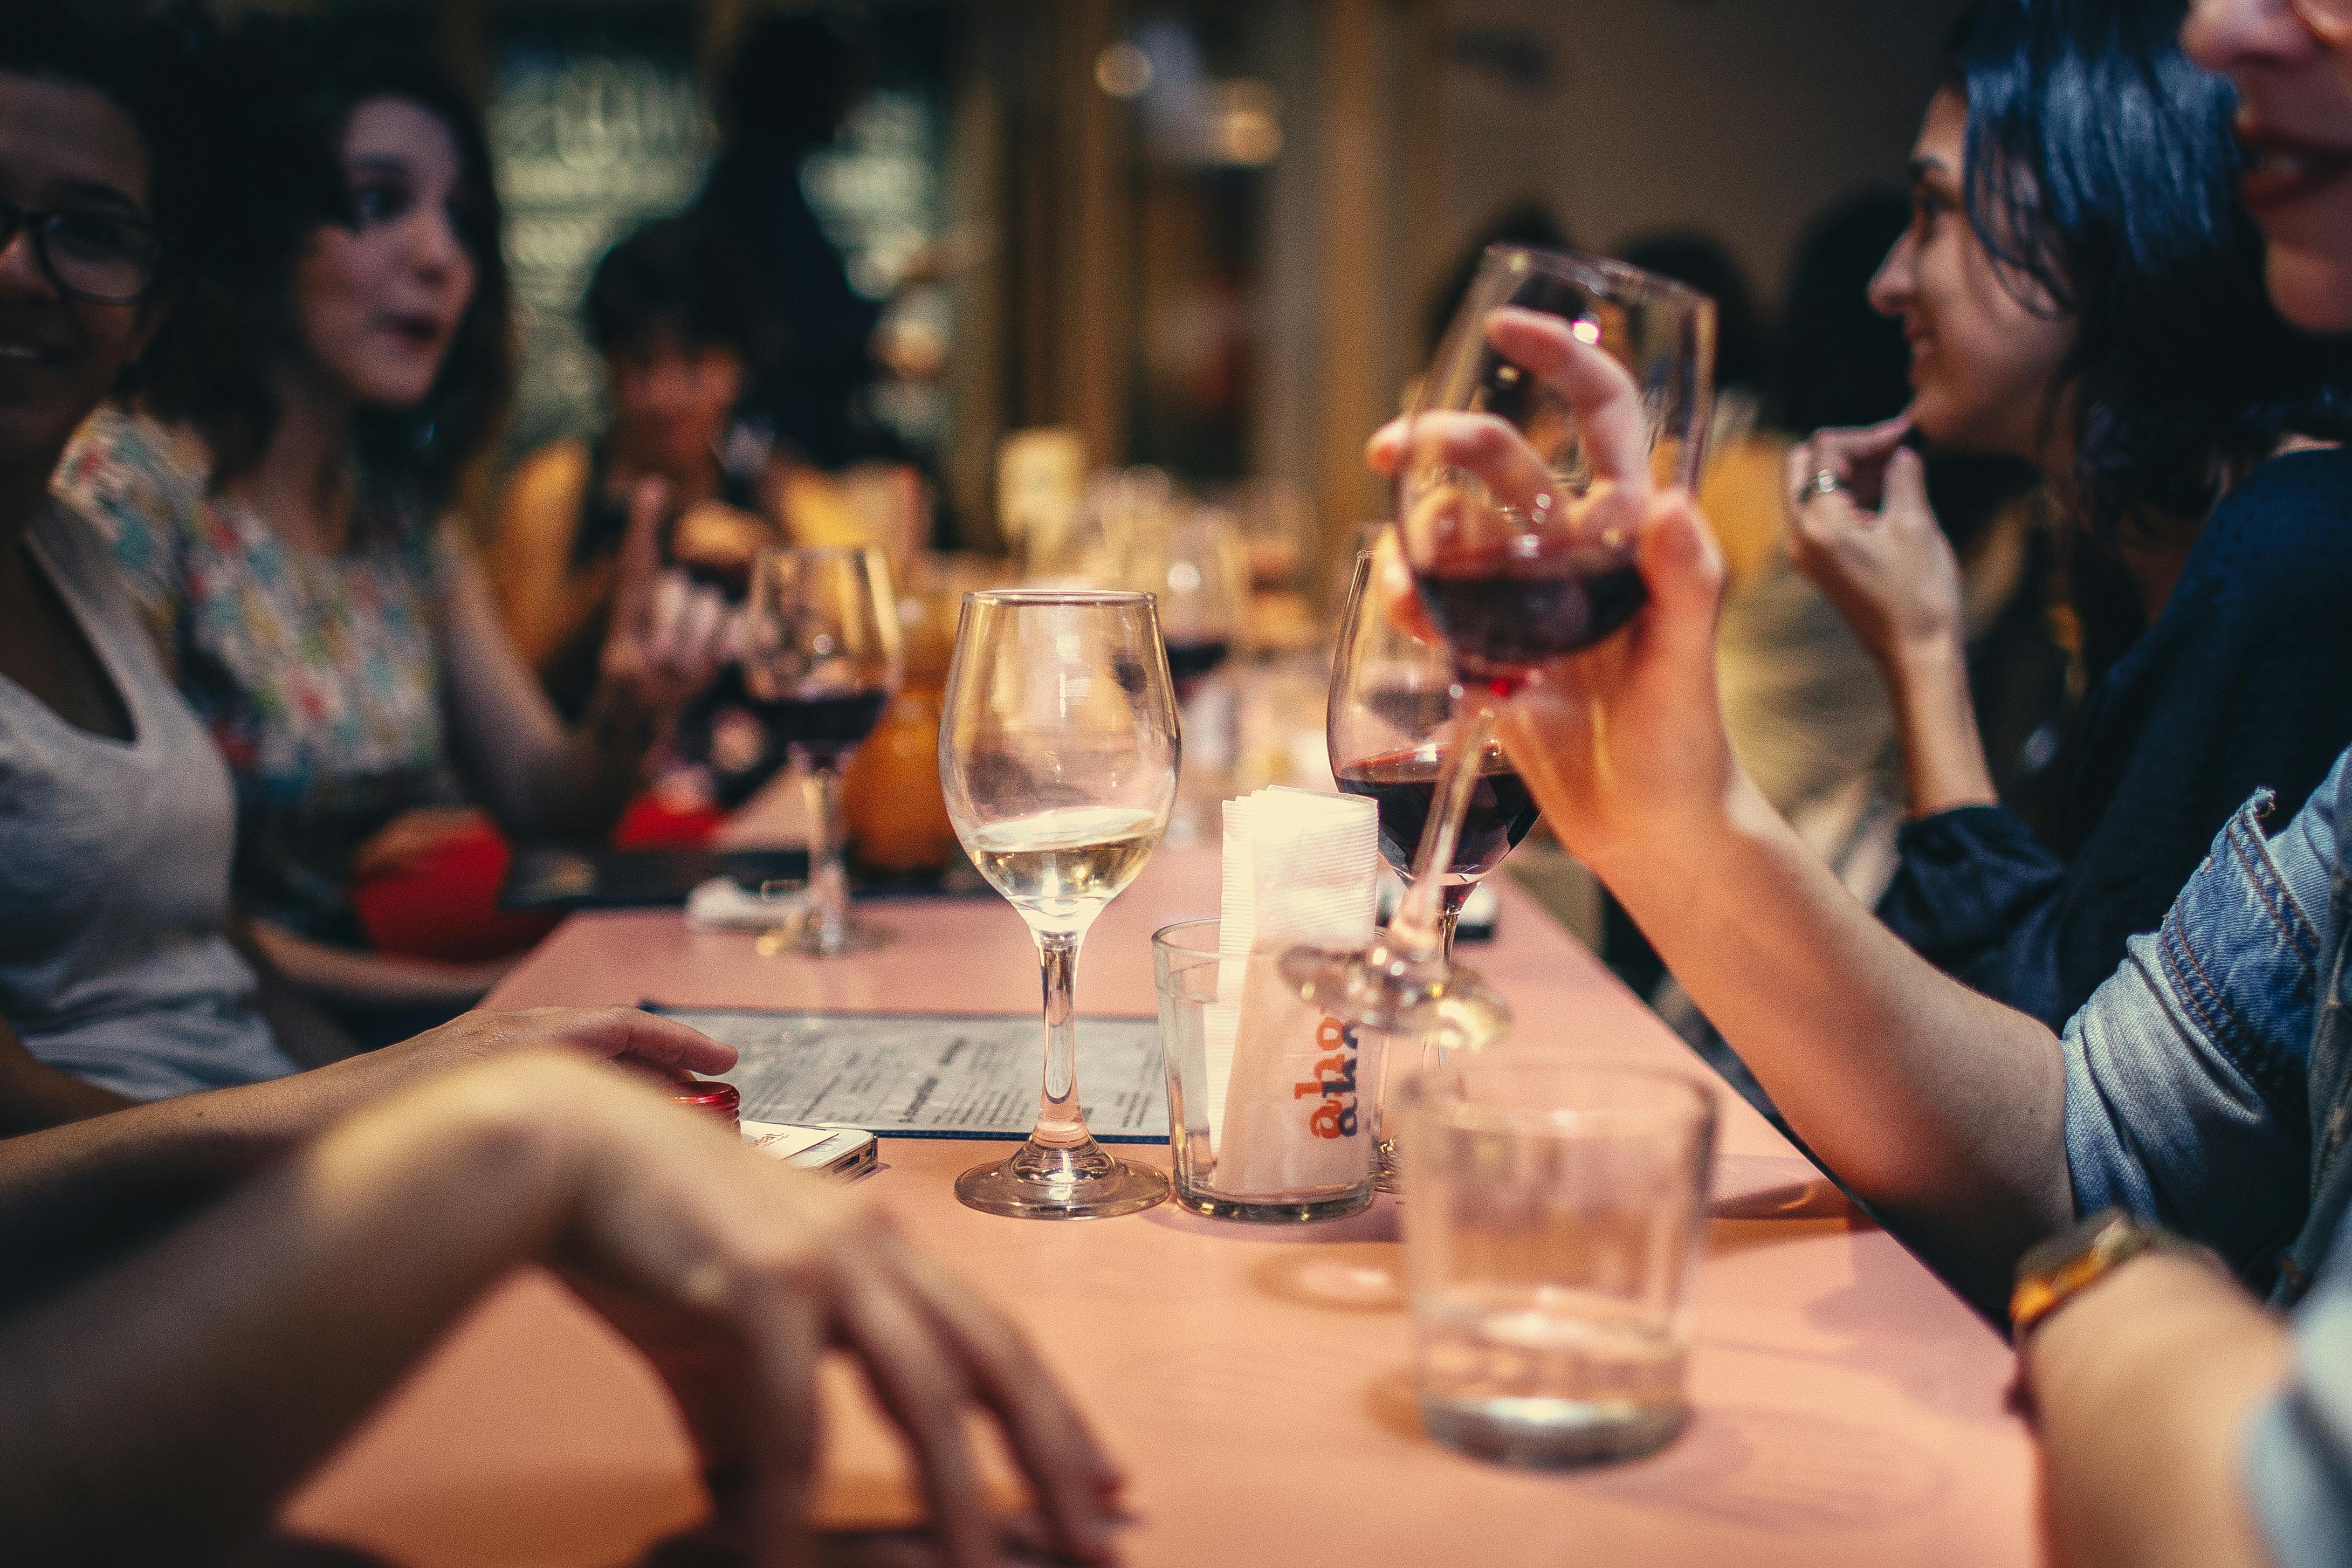 People gathered together for a meal and drinks at a restaurant | Source: Pexels